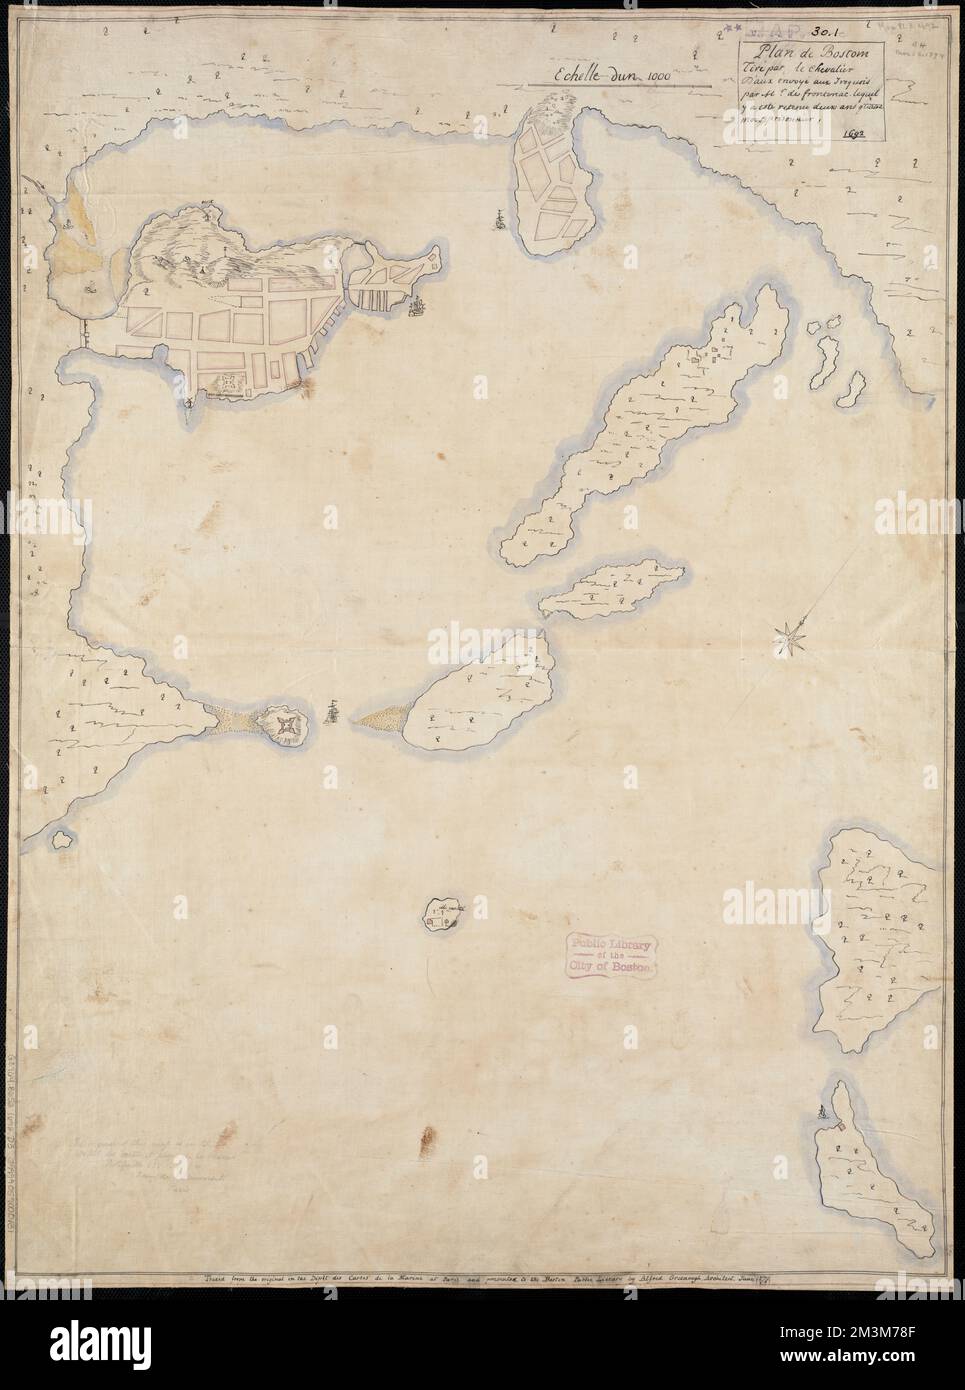 Plan de Boston , Fortification, Massachusetts, Boston, Maps, Manuscript, Early works to 1800, Fortification, Massachusetts, Boston Harbor Islands, Maps, Manuscript, Early works to 1800, Boston Mass., Maps, Manuscript, Early works to 1800, Boston Harbor Islands Mass., Maps, Manuscript, Early works to 1800, Frontenac, Louis de Buade, comte de, 1620-1698 Norman B. Leventhal Map Center Collection Stock Photo